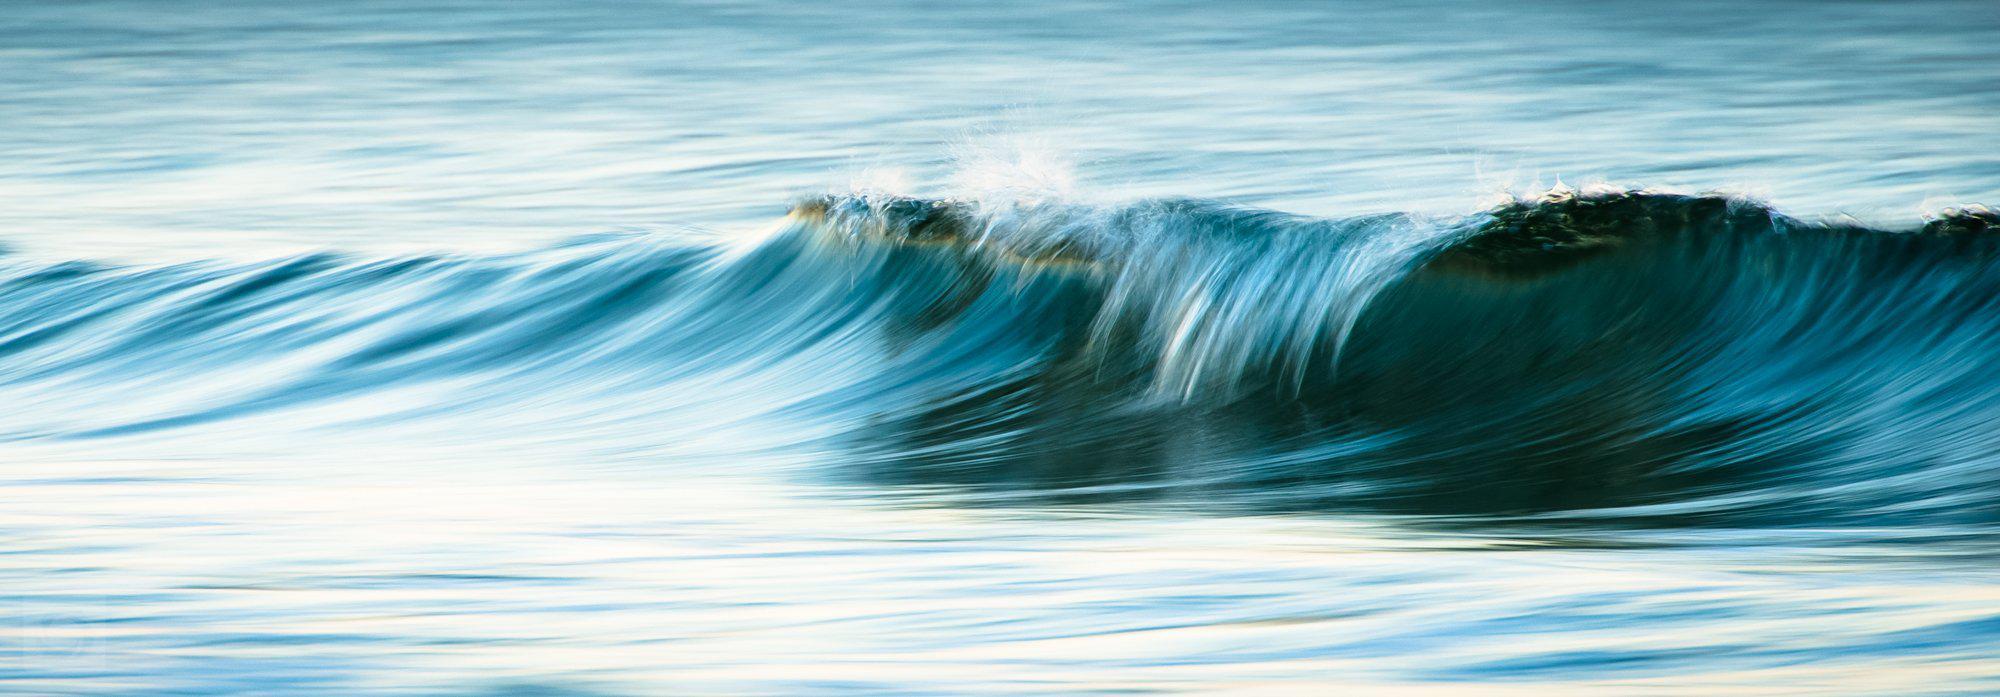 Cate Brown Photo Soft Water #10  //  Ocean Photography Made to Order Ocean Fine Art